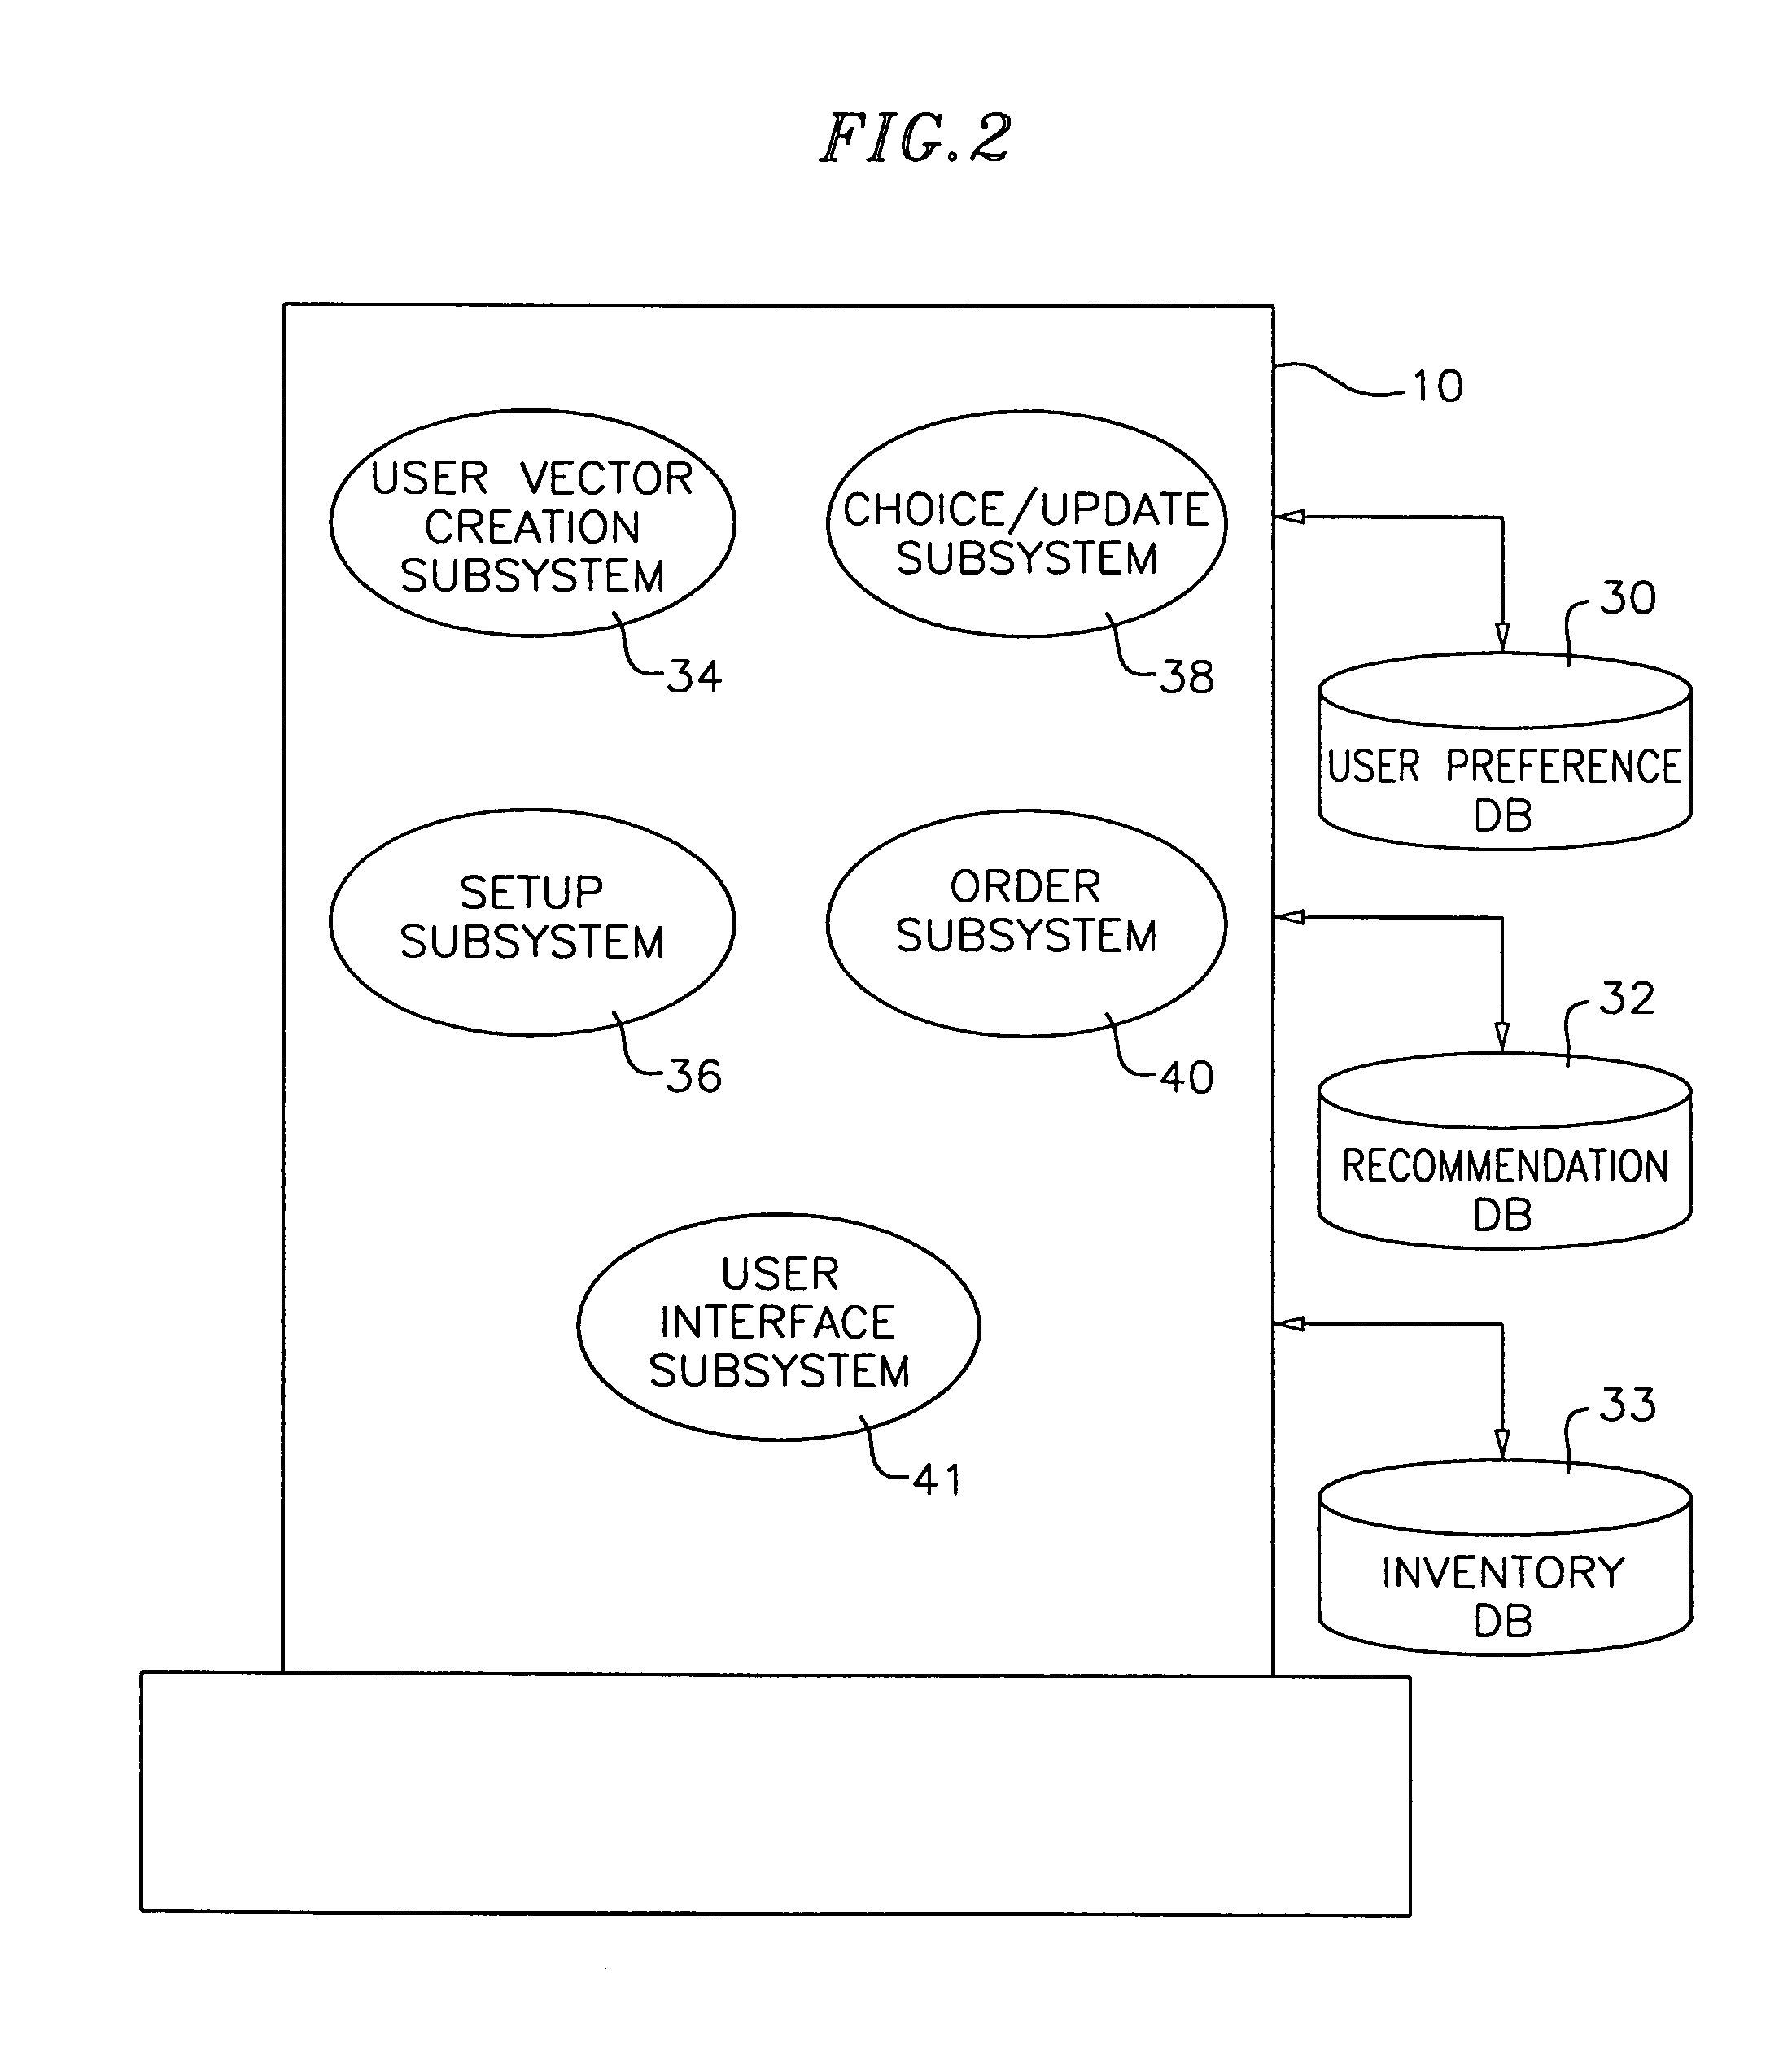 System and method for creating and submitting electronic shopping lists